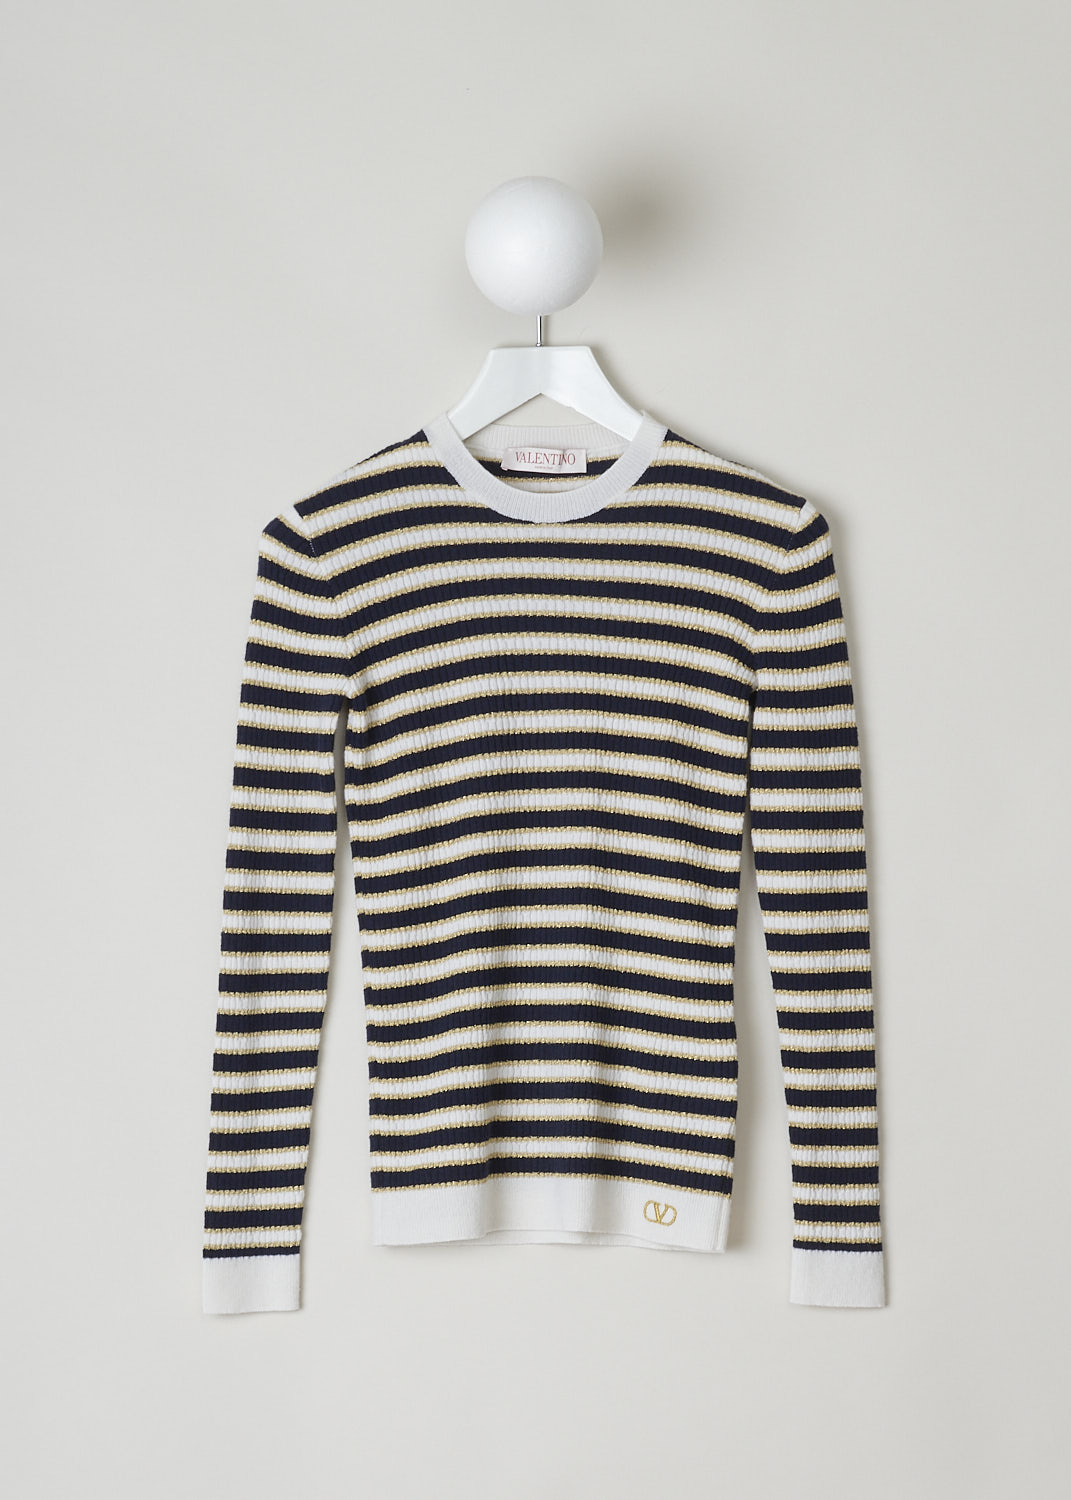 VALENTINO, HORIZONTALLY STRIPED LONG SLEEVE TOP, 1B3KC37I7EB_7CL, White, Print, Gold, Front, This skin tight ribbed sweater has a horizontally striped motif with blue, white and gold. The sweater has a round neckline in white. Both the cuffs and hemline are also white. The brand's signature V is embroidered on the hemline in gold.
